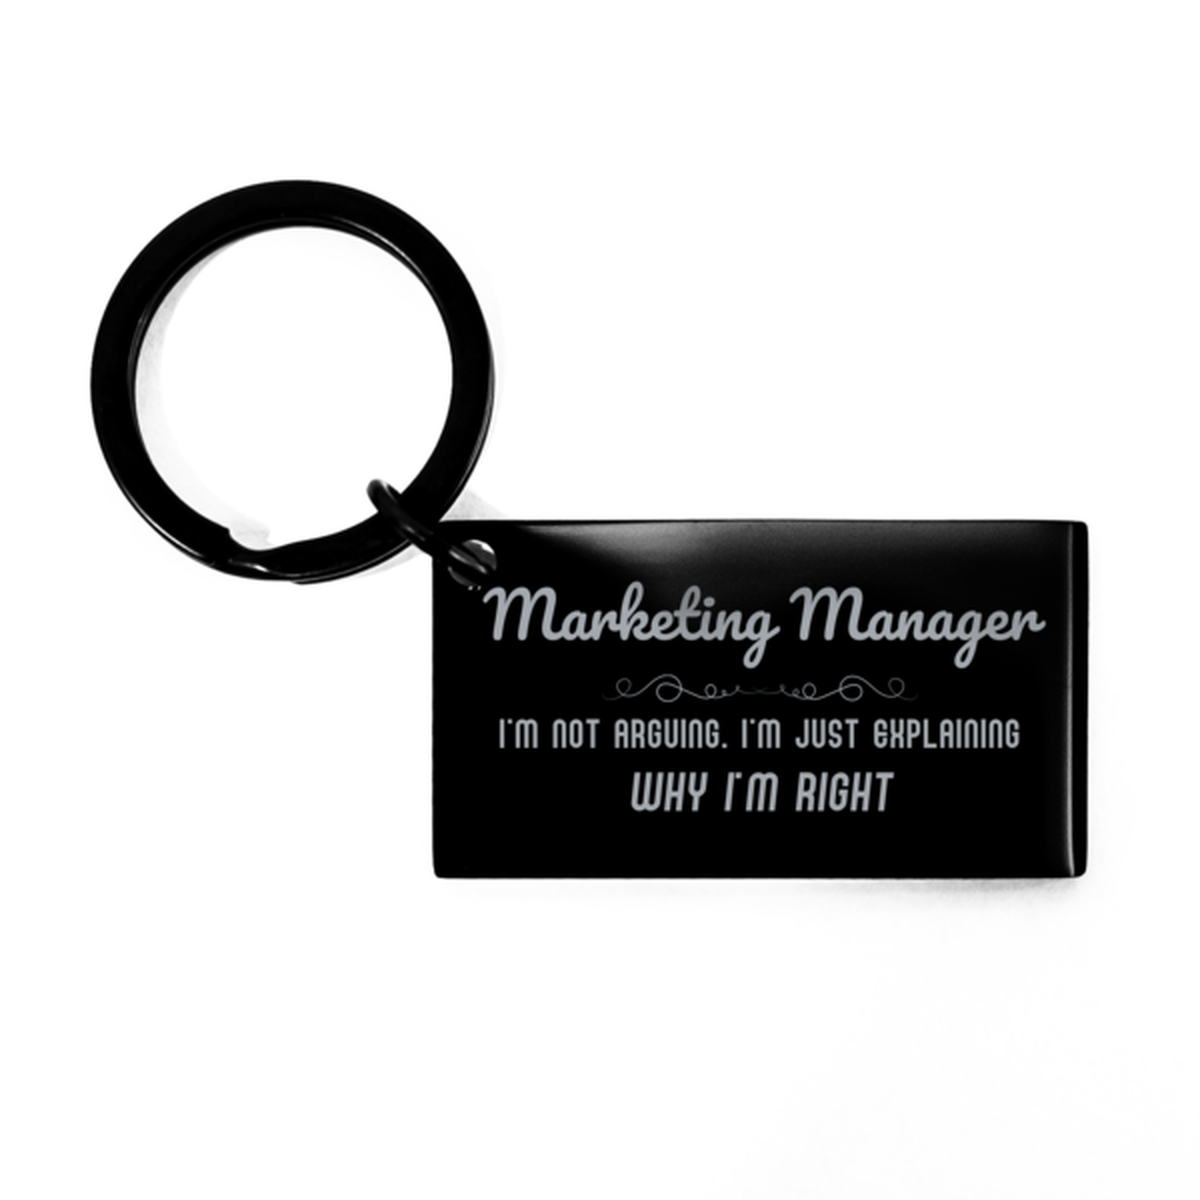 Marketing Manager I'm not Arguing. I'm Just Explaining Why I'm RIGHT Keychain, Funny Saying Quote Marketing Manager Gifts For Marketing Manager Graduation Birthday Christmas Gifts for Men Women Coworker